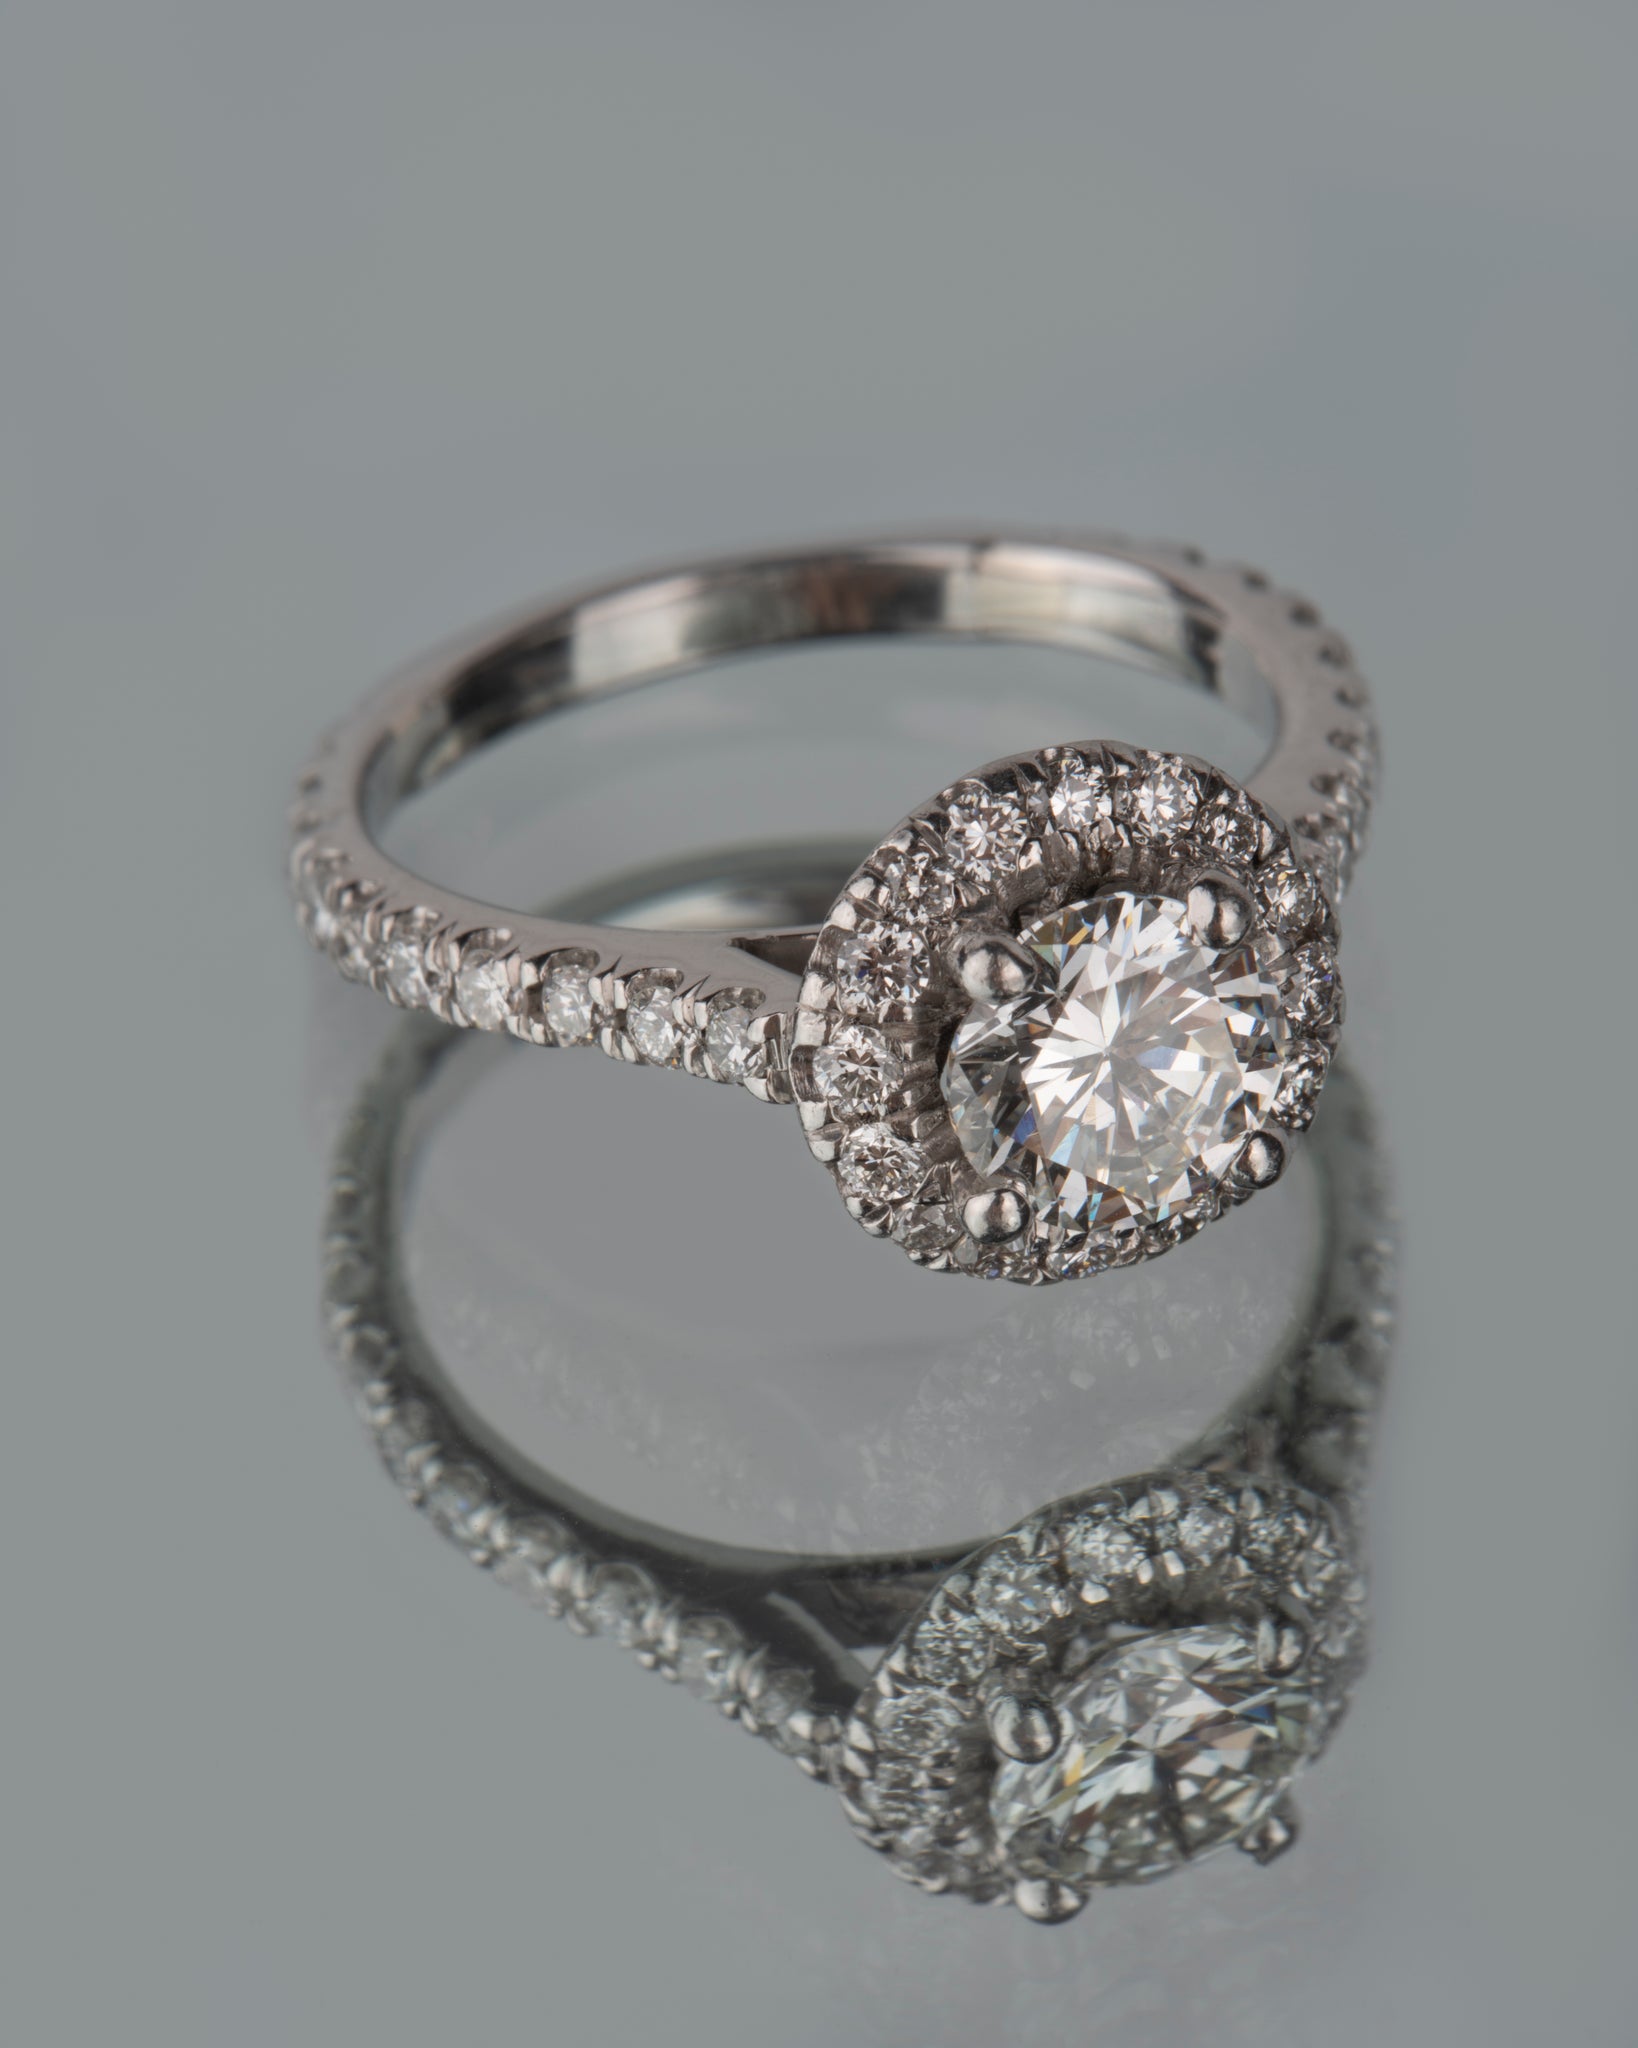 3/4 ct Natural VS2 H Color Diamond with a Round Diamond Halo Ring in Platinum 950 at a Size 7